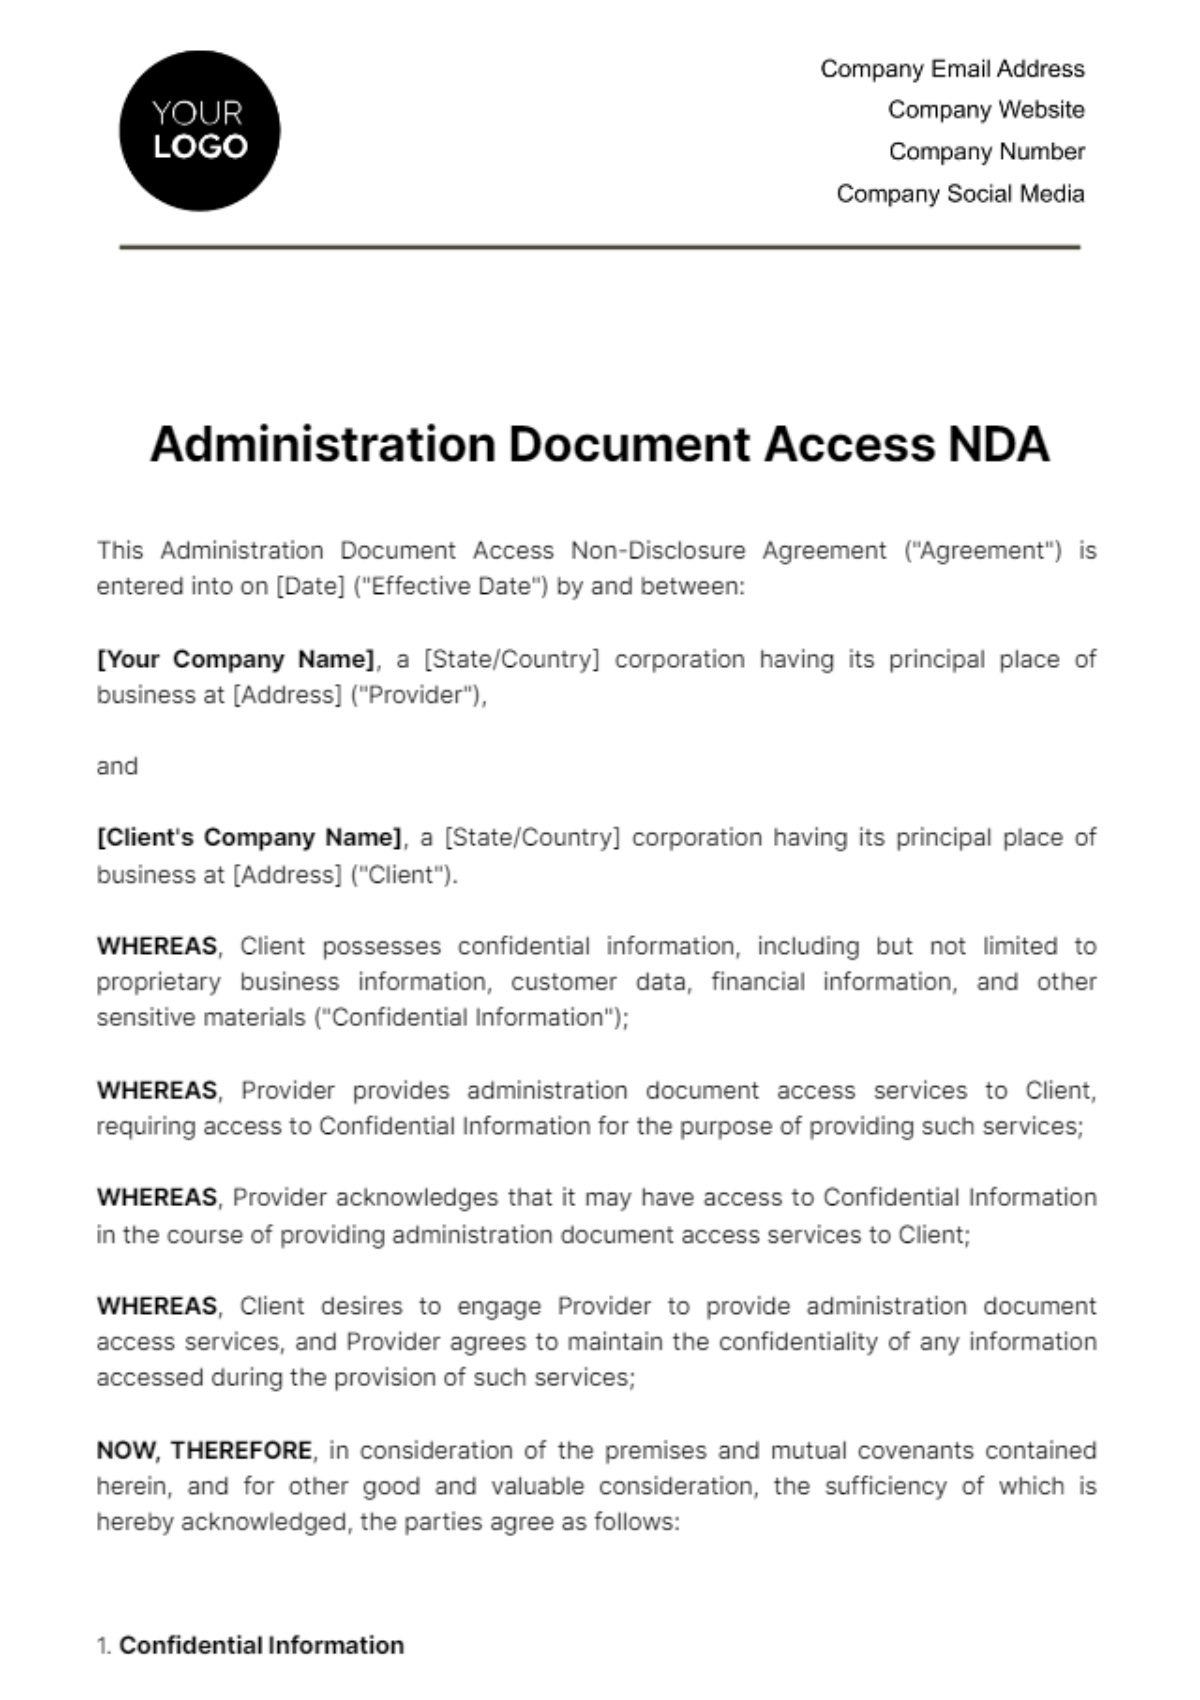 Free Administration Document Access NDA Template